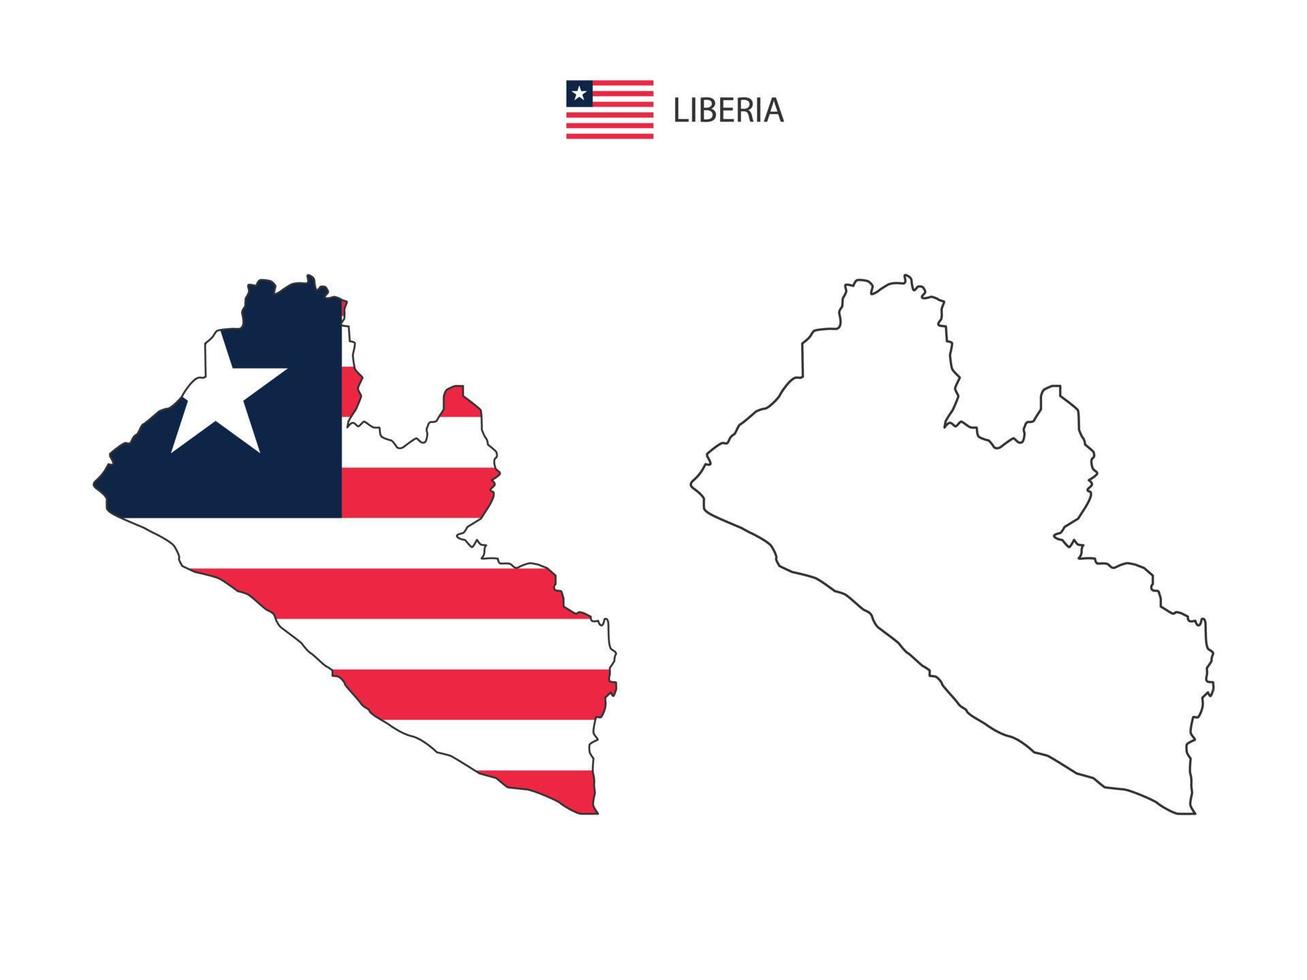 Liberia map city vector divided by outline simplicity style. Have 2 versions, black thin line version and color of country flag version. Both map were on the white background.